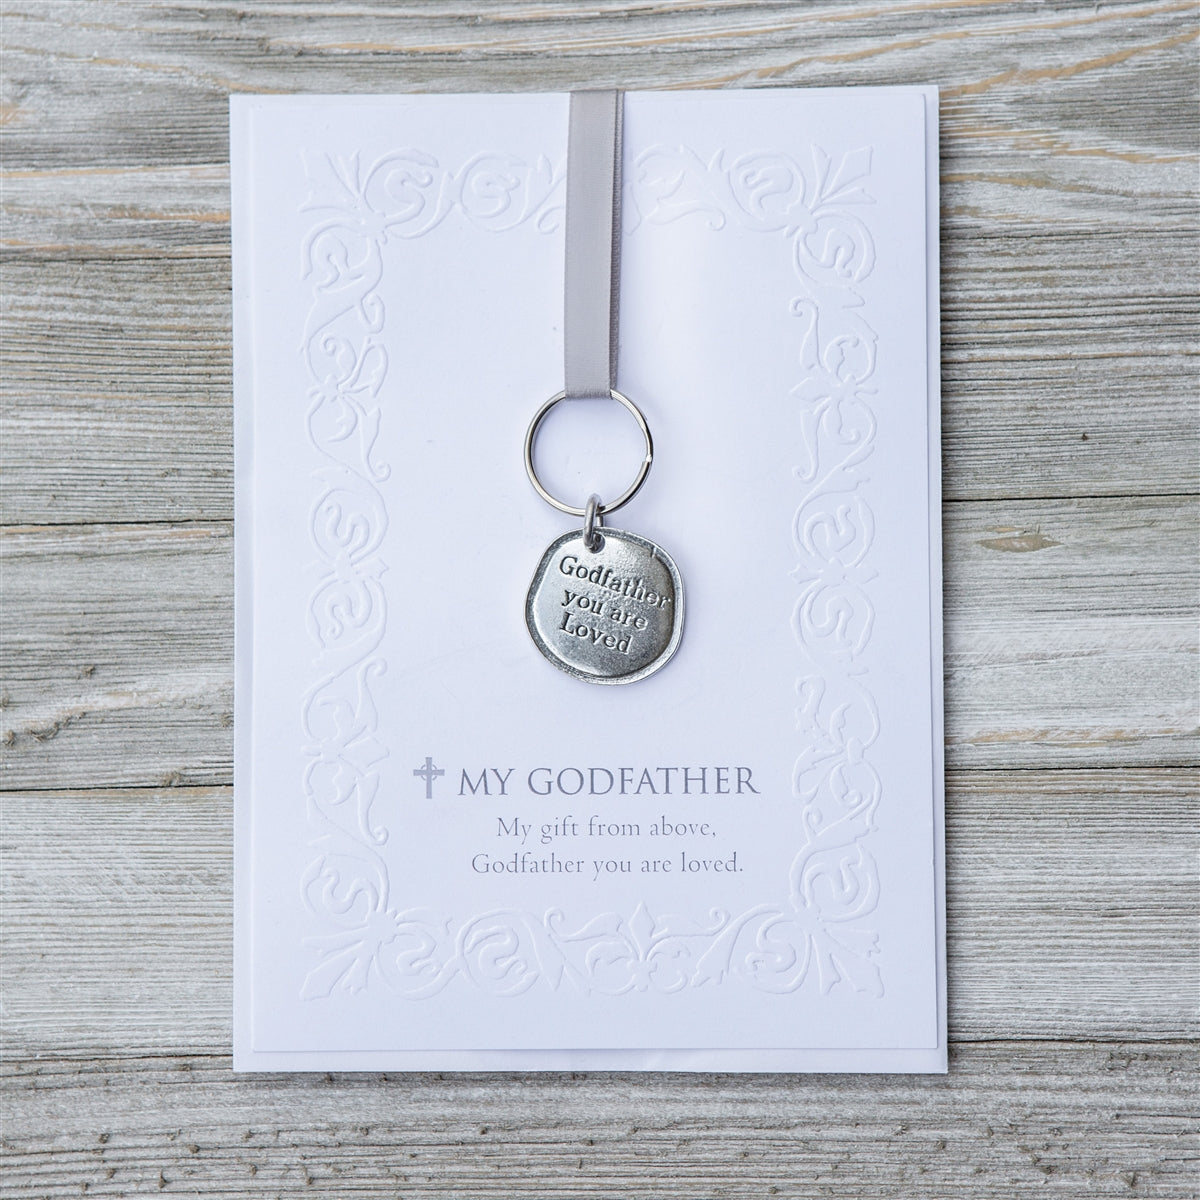 Keychain with pewter coin that says &quot;Godfather you are loved&quot; packaged with an embossed notecard with My Godfather sentiment.